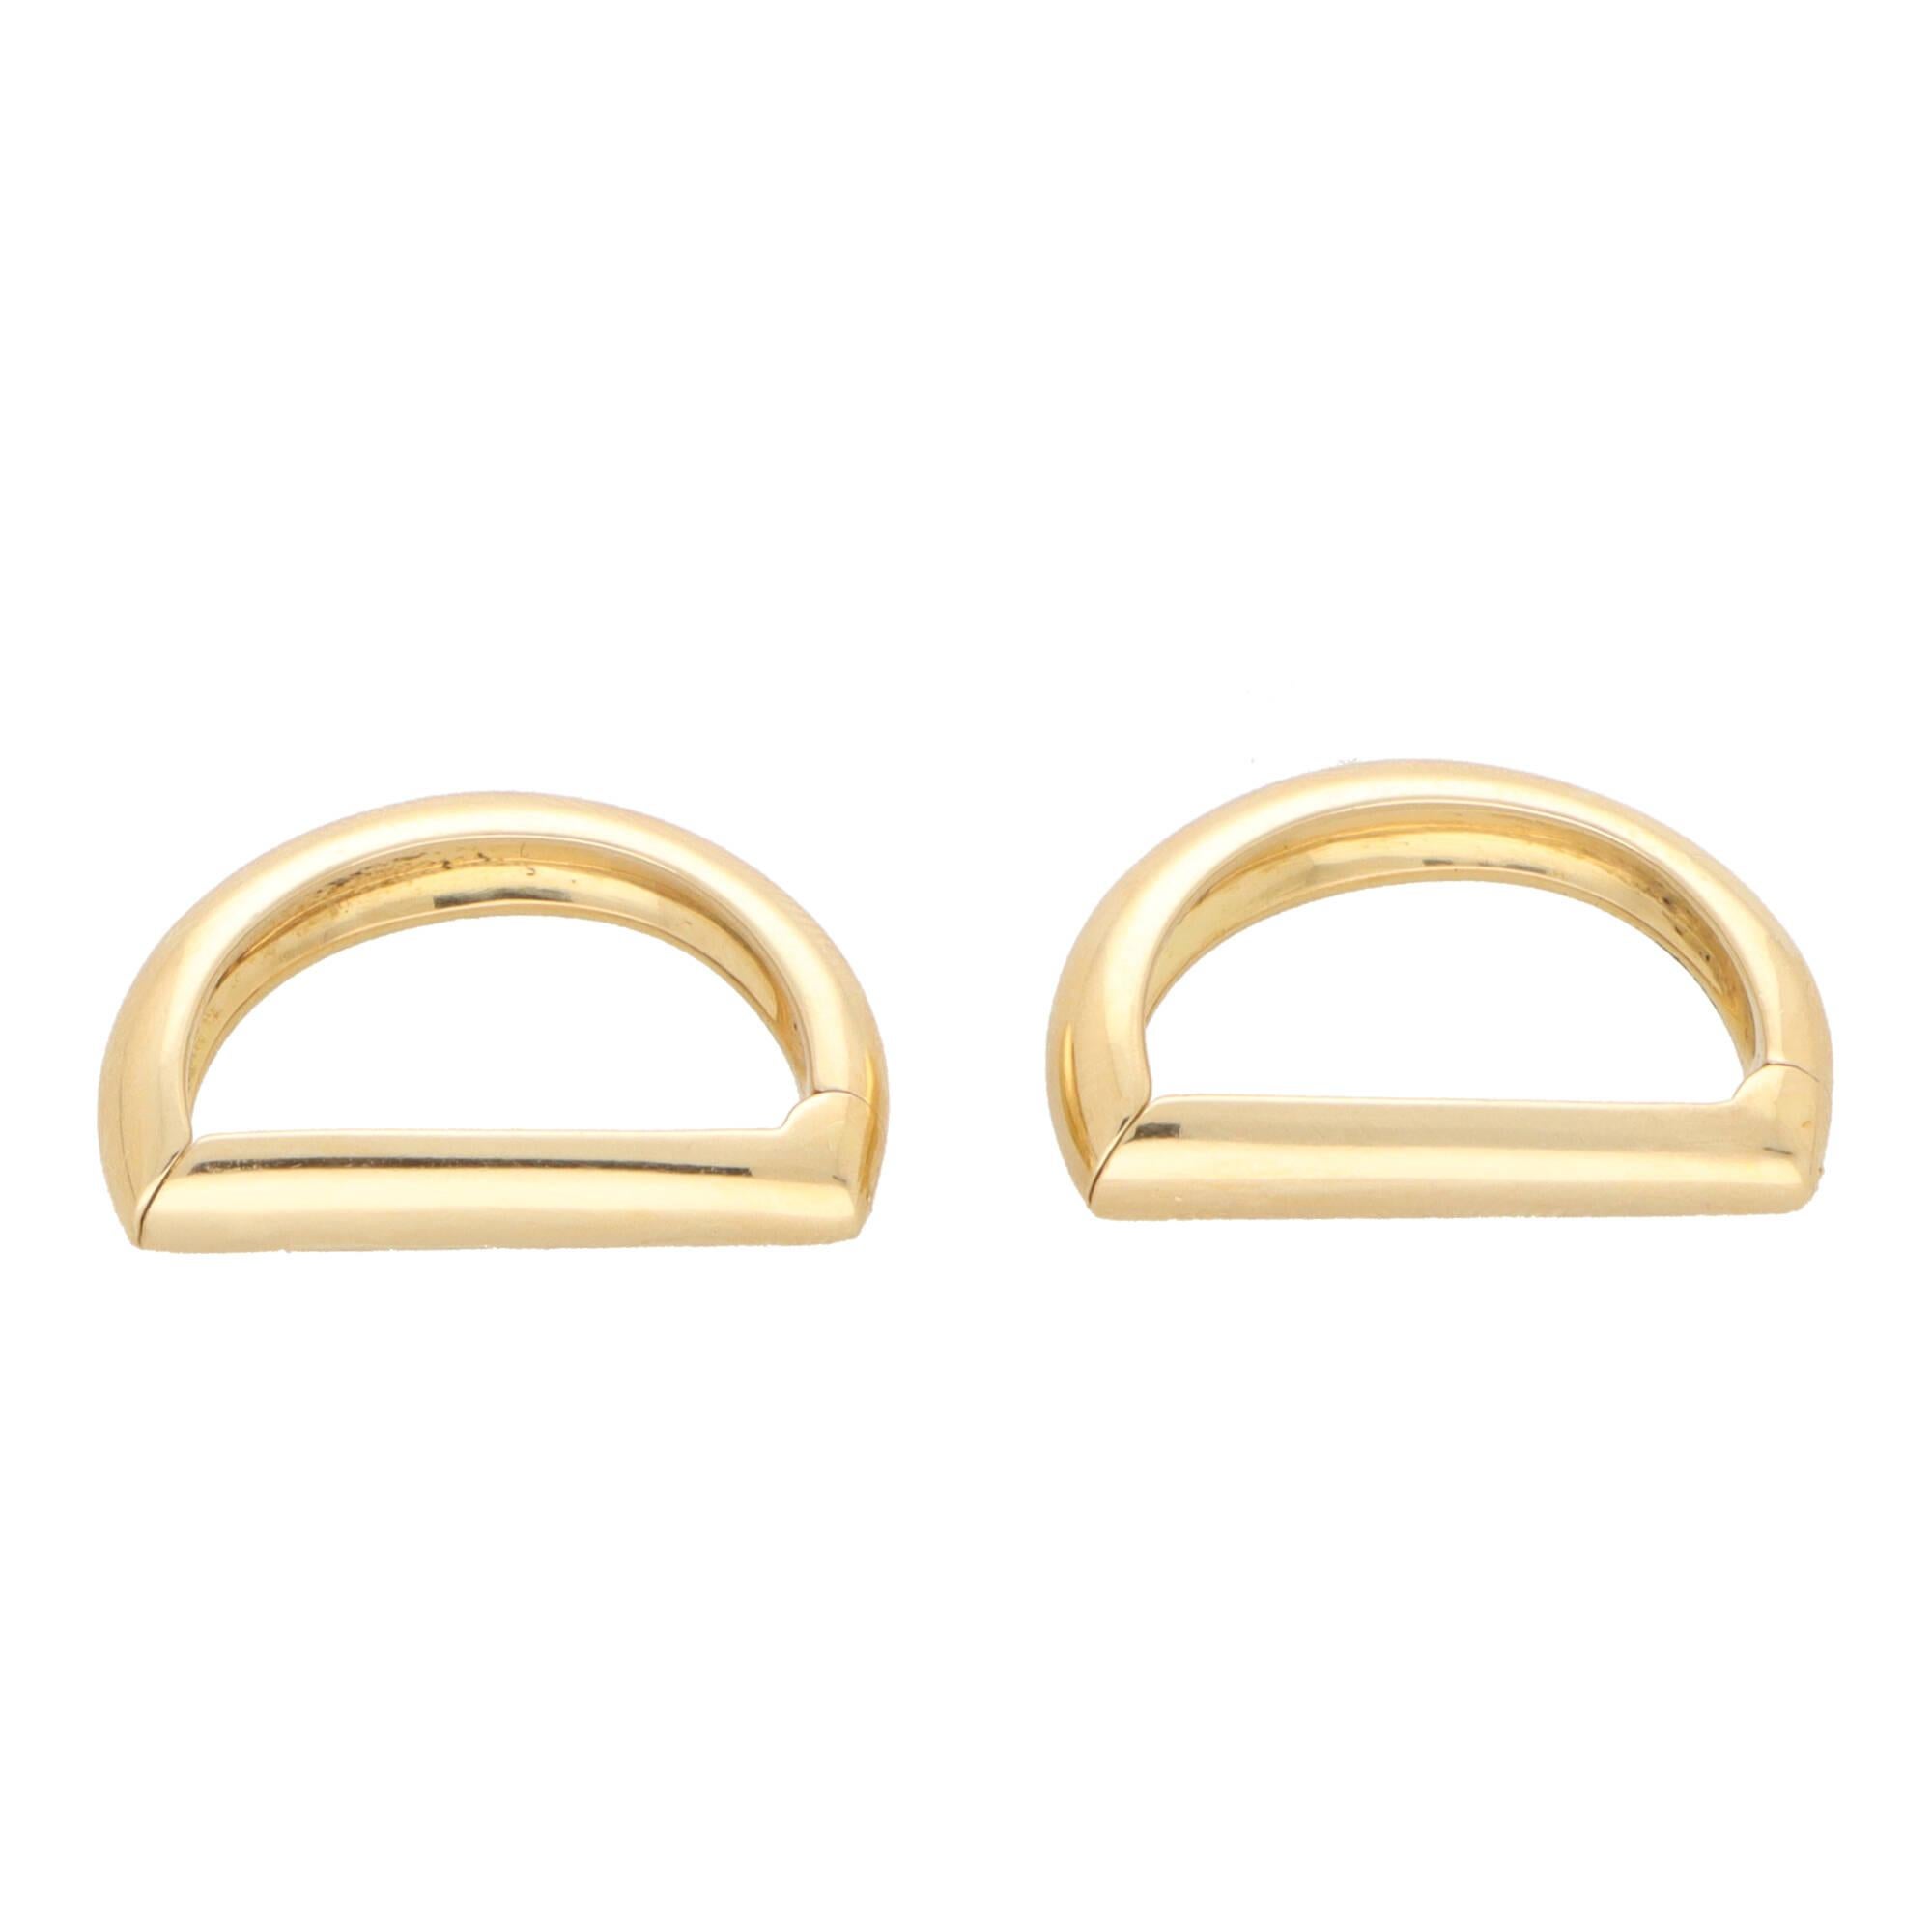 Vintage 1980s Cartier Clip Cufflinks Set in 18k Yellow Gold In Excellent Condition For Sale In London, GB